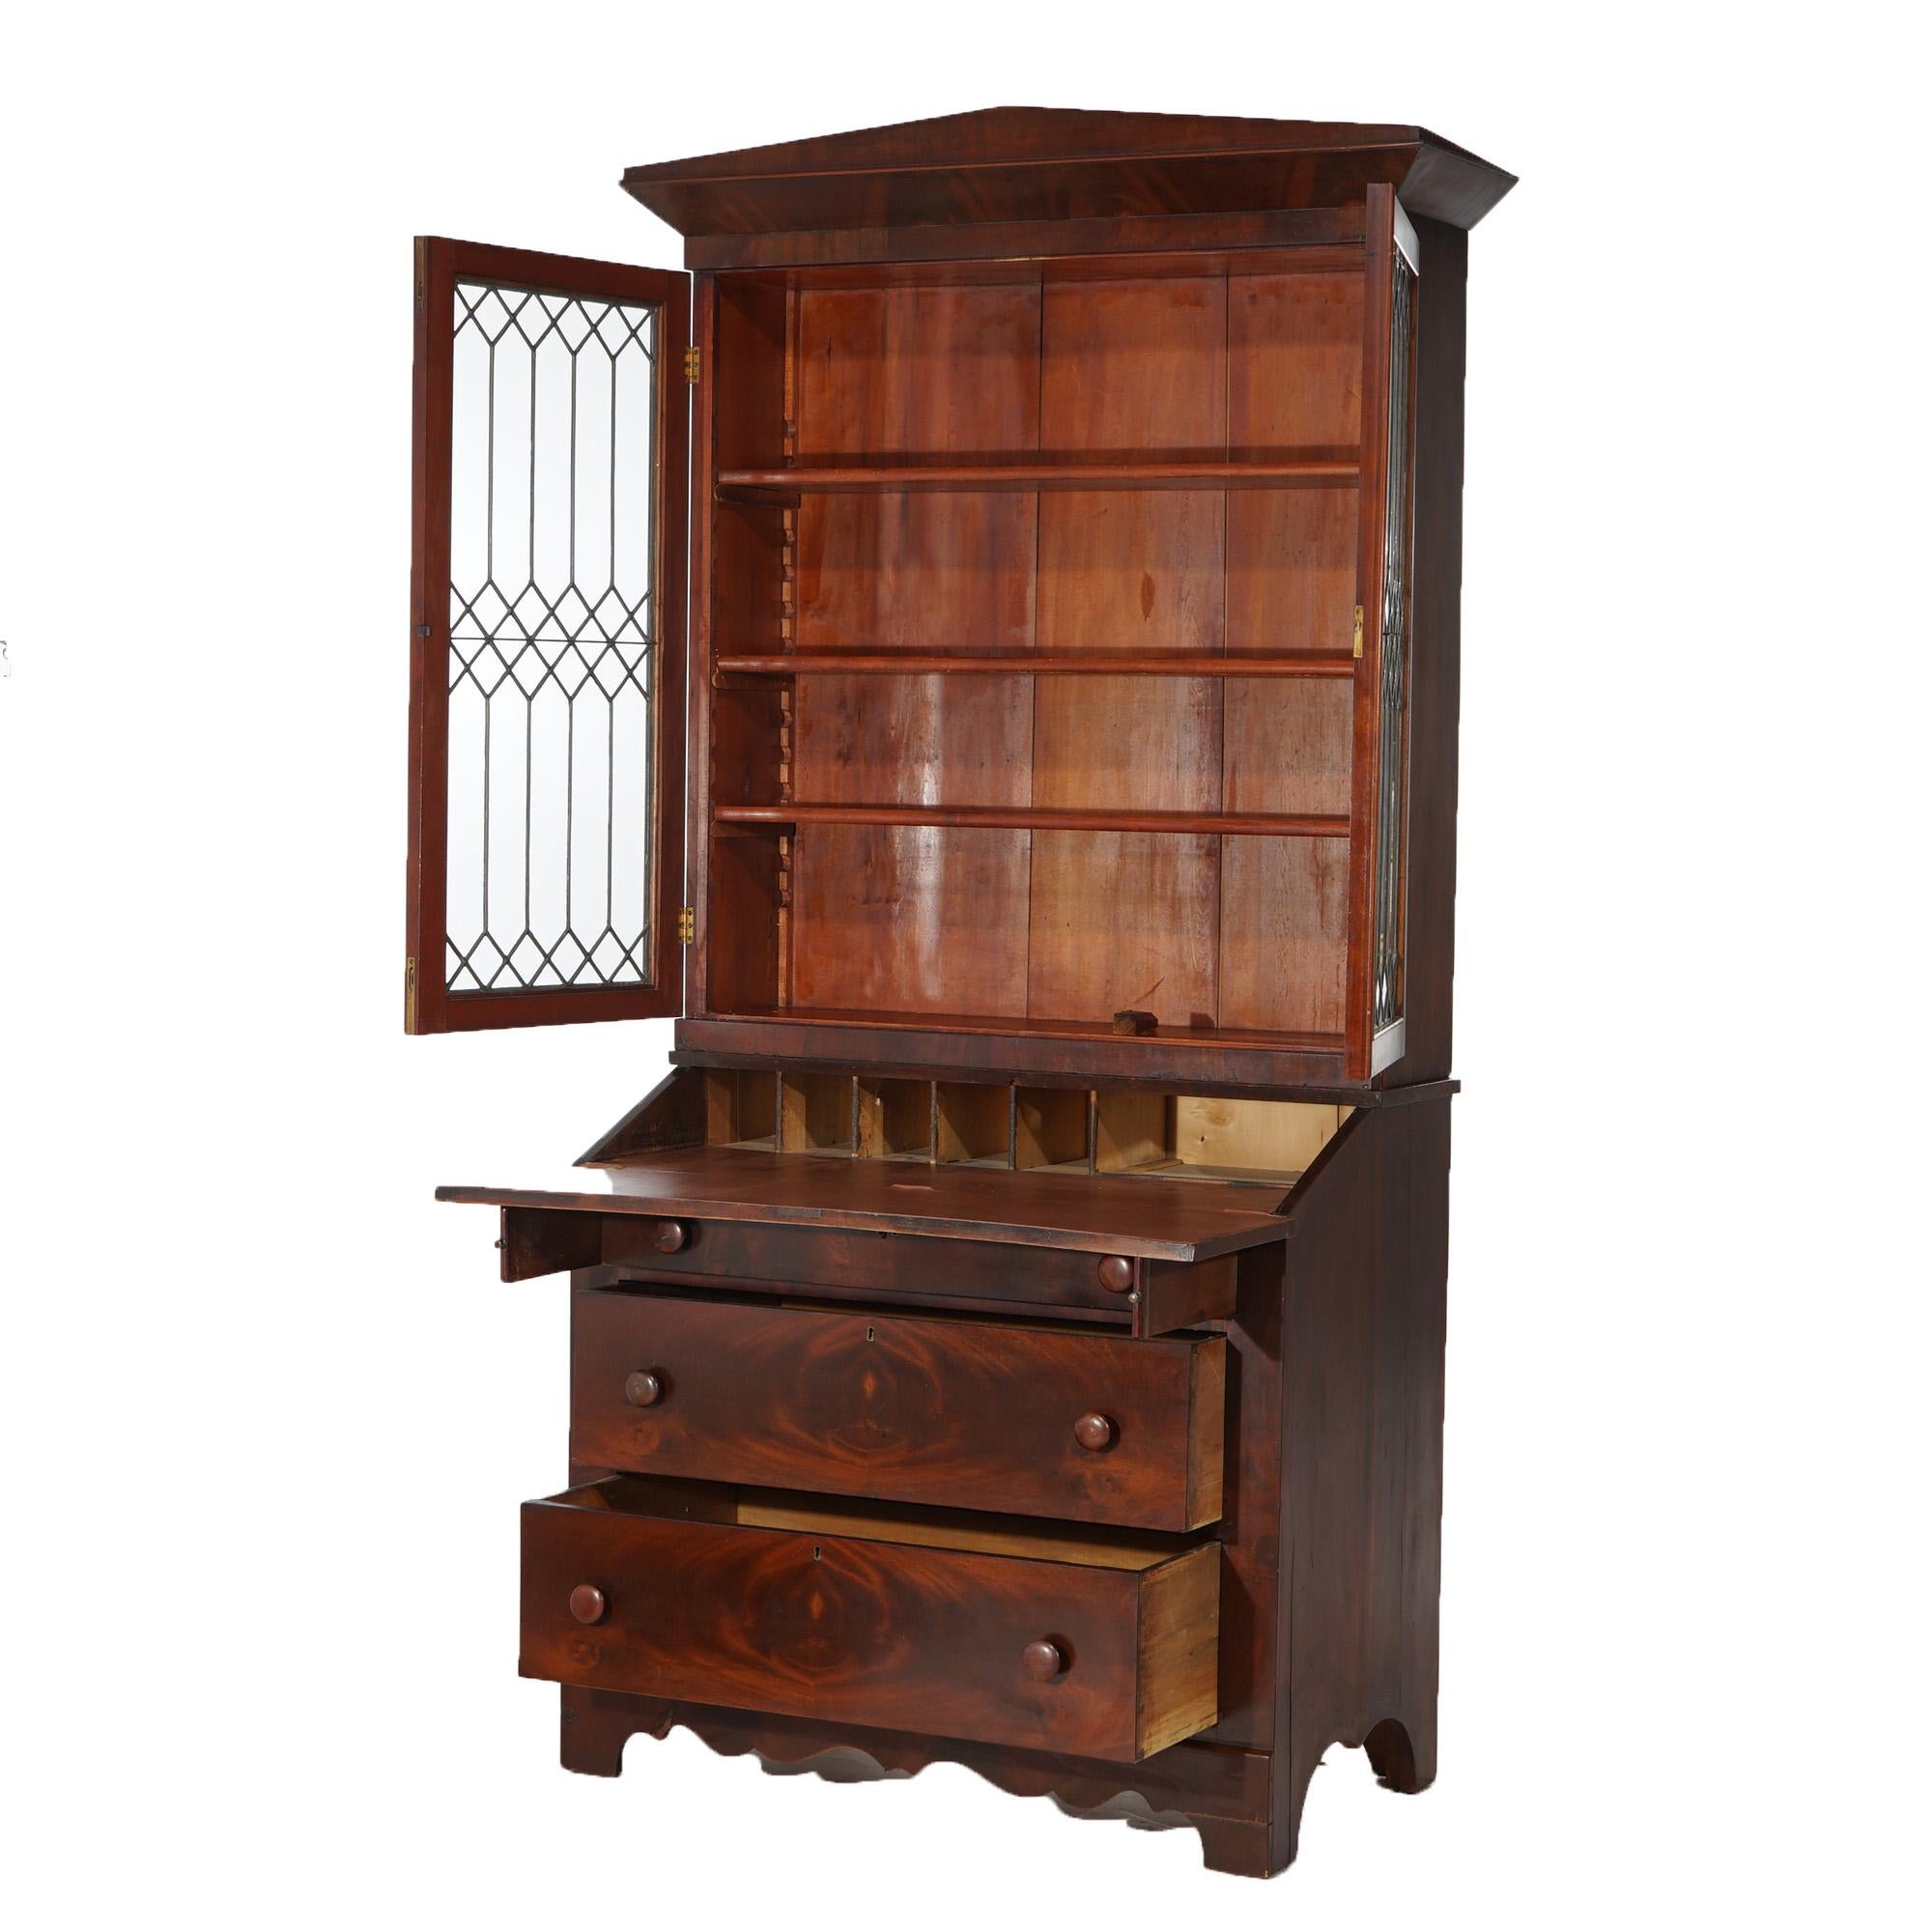 Antique American Empire Flame Mahogany Secretary Desk With Leaded Glass c1840 For Sale 1